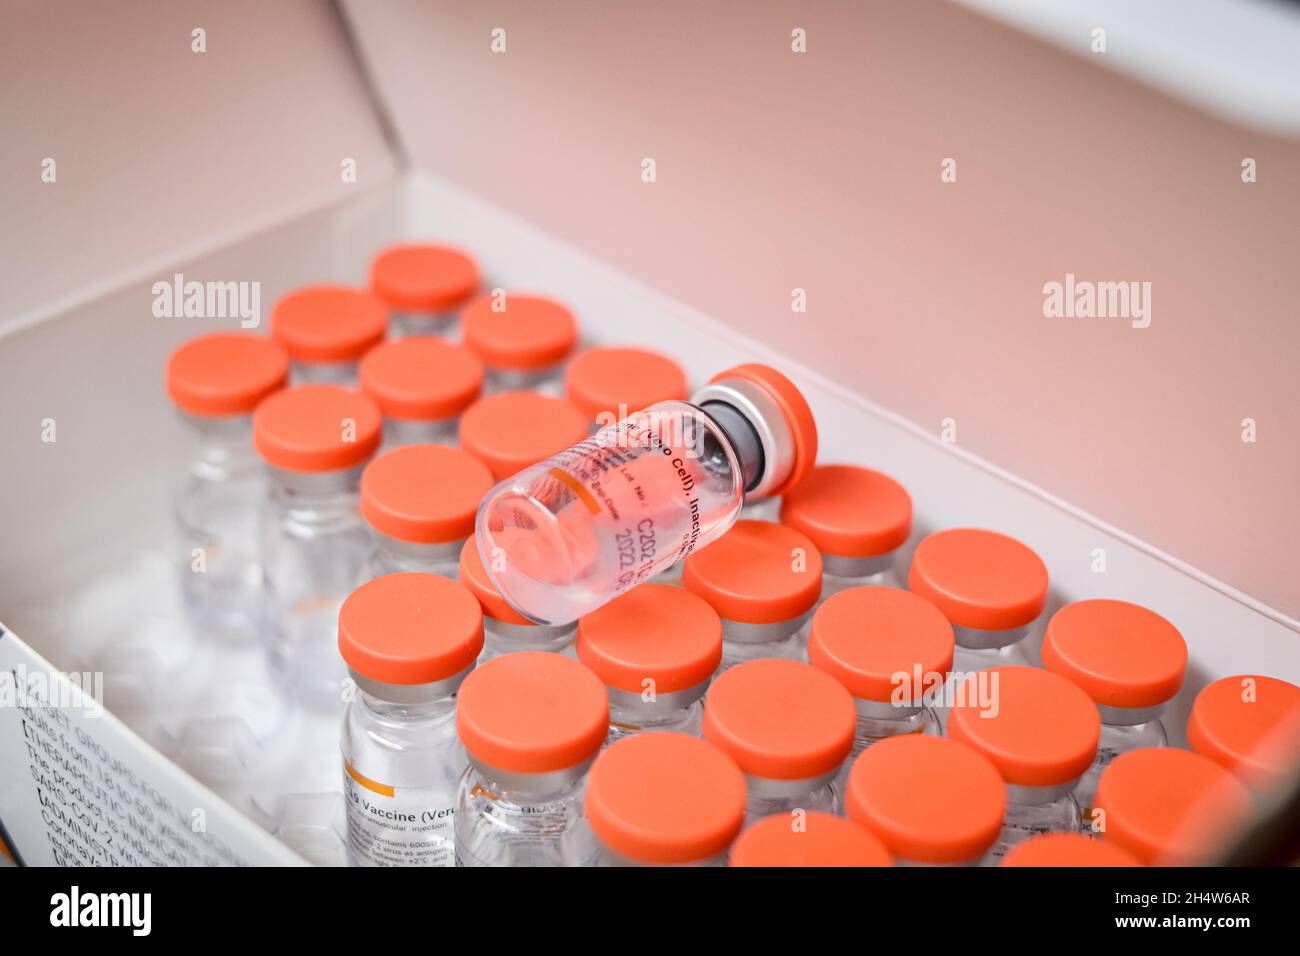 A box of China's SINOVAC COVID-19 vaccine as the Colombian government begins to vaccinate children between ages 3 to 11 against the Coronavirus disease (COVID-19) with the China's SINOVAC vaccine, in Ipiales - Nariño, Colombia on November 3, 2021. Stock Photo